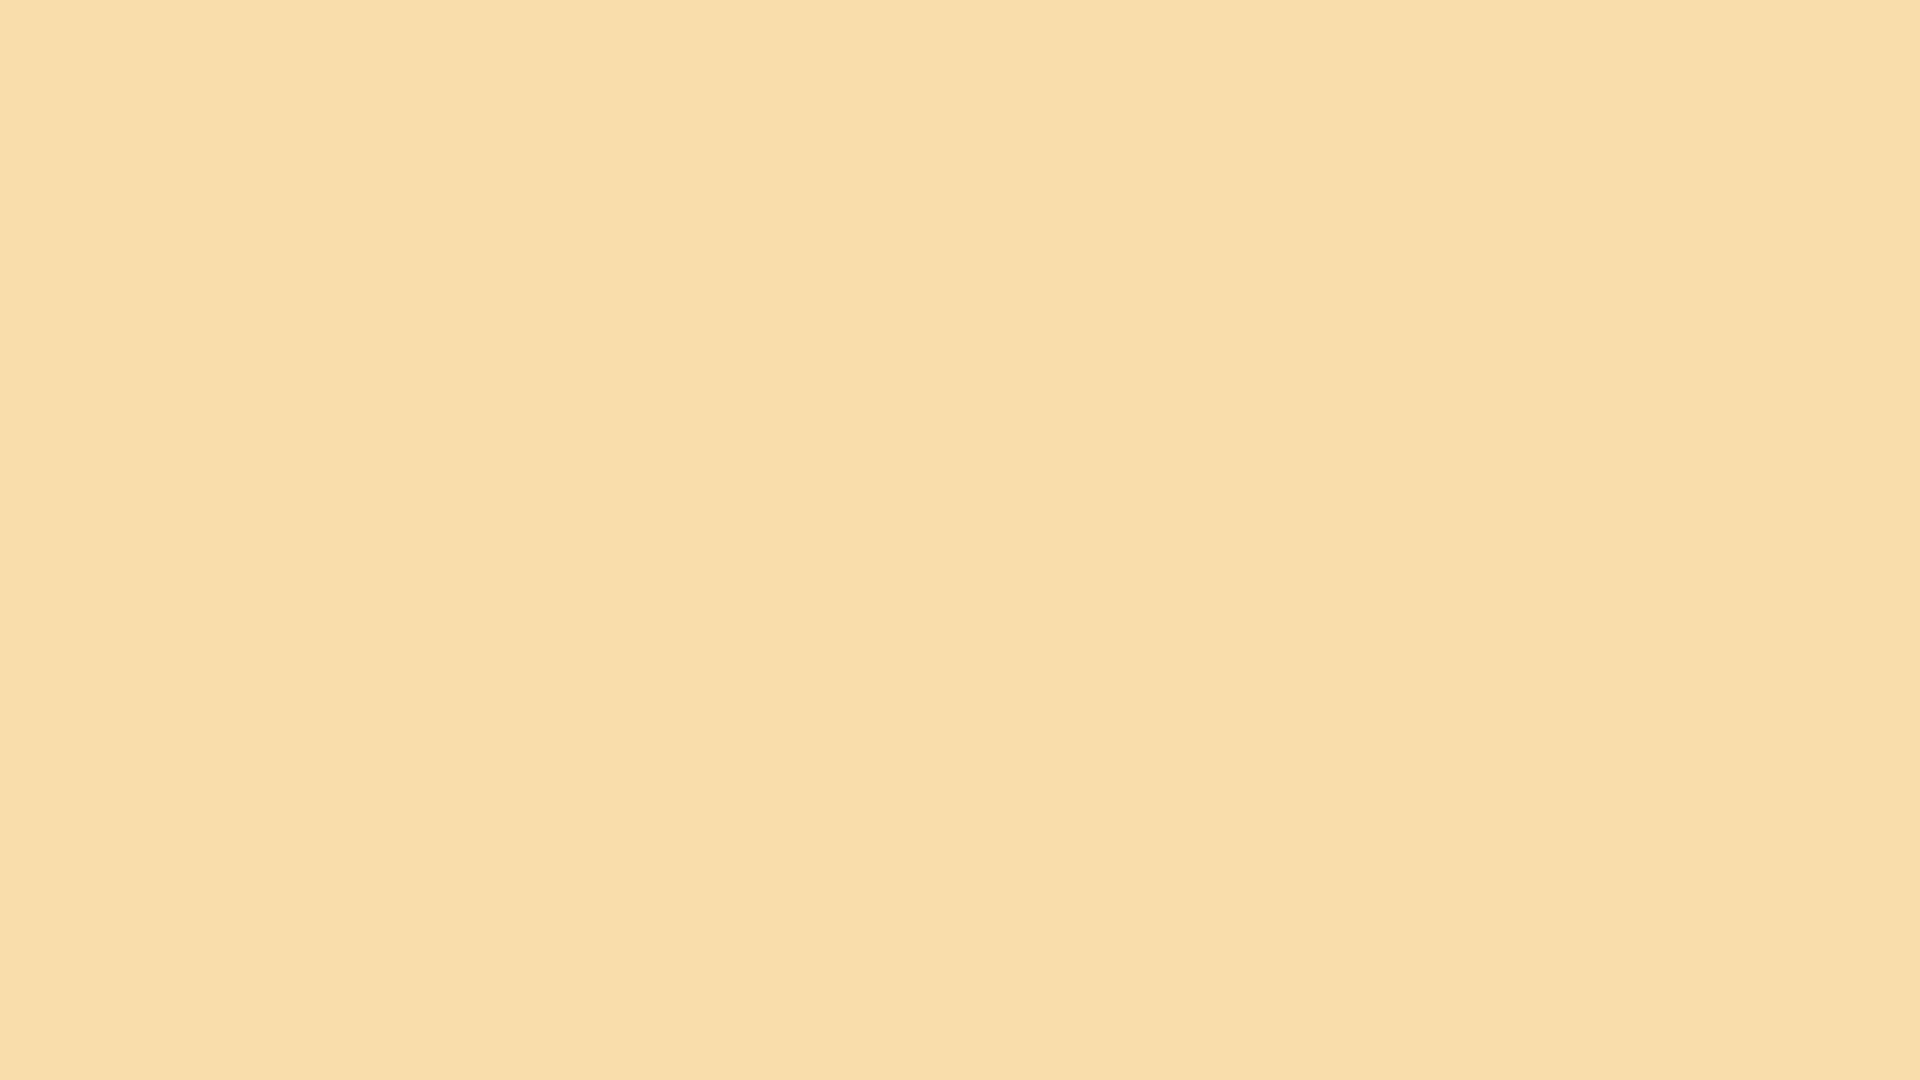 1920x1080 Peach yellow Solid Color Background